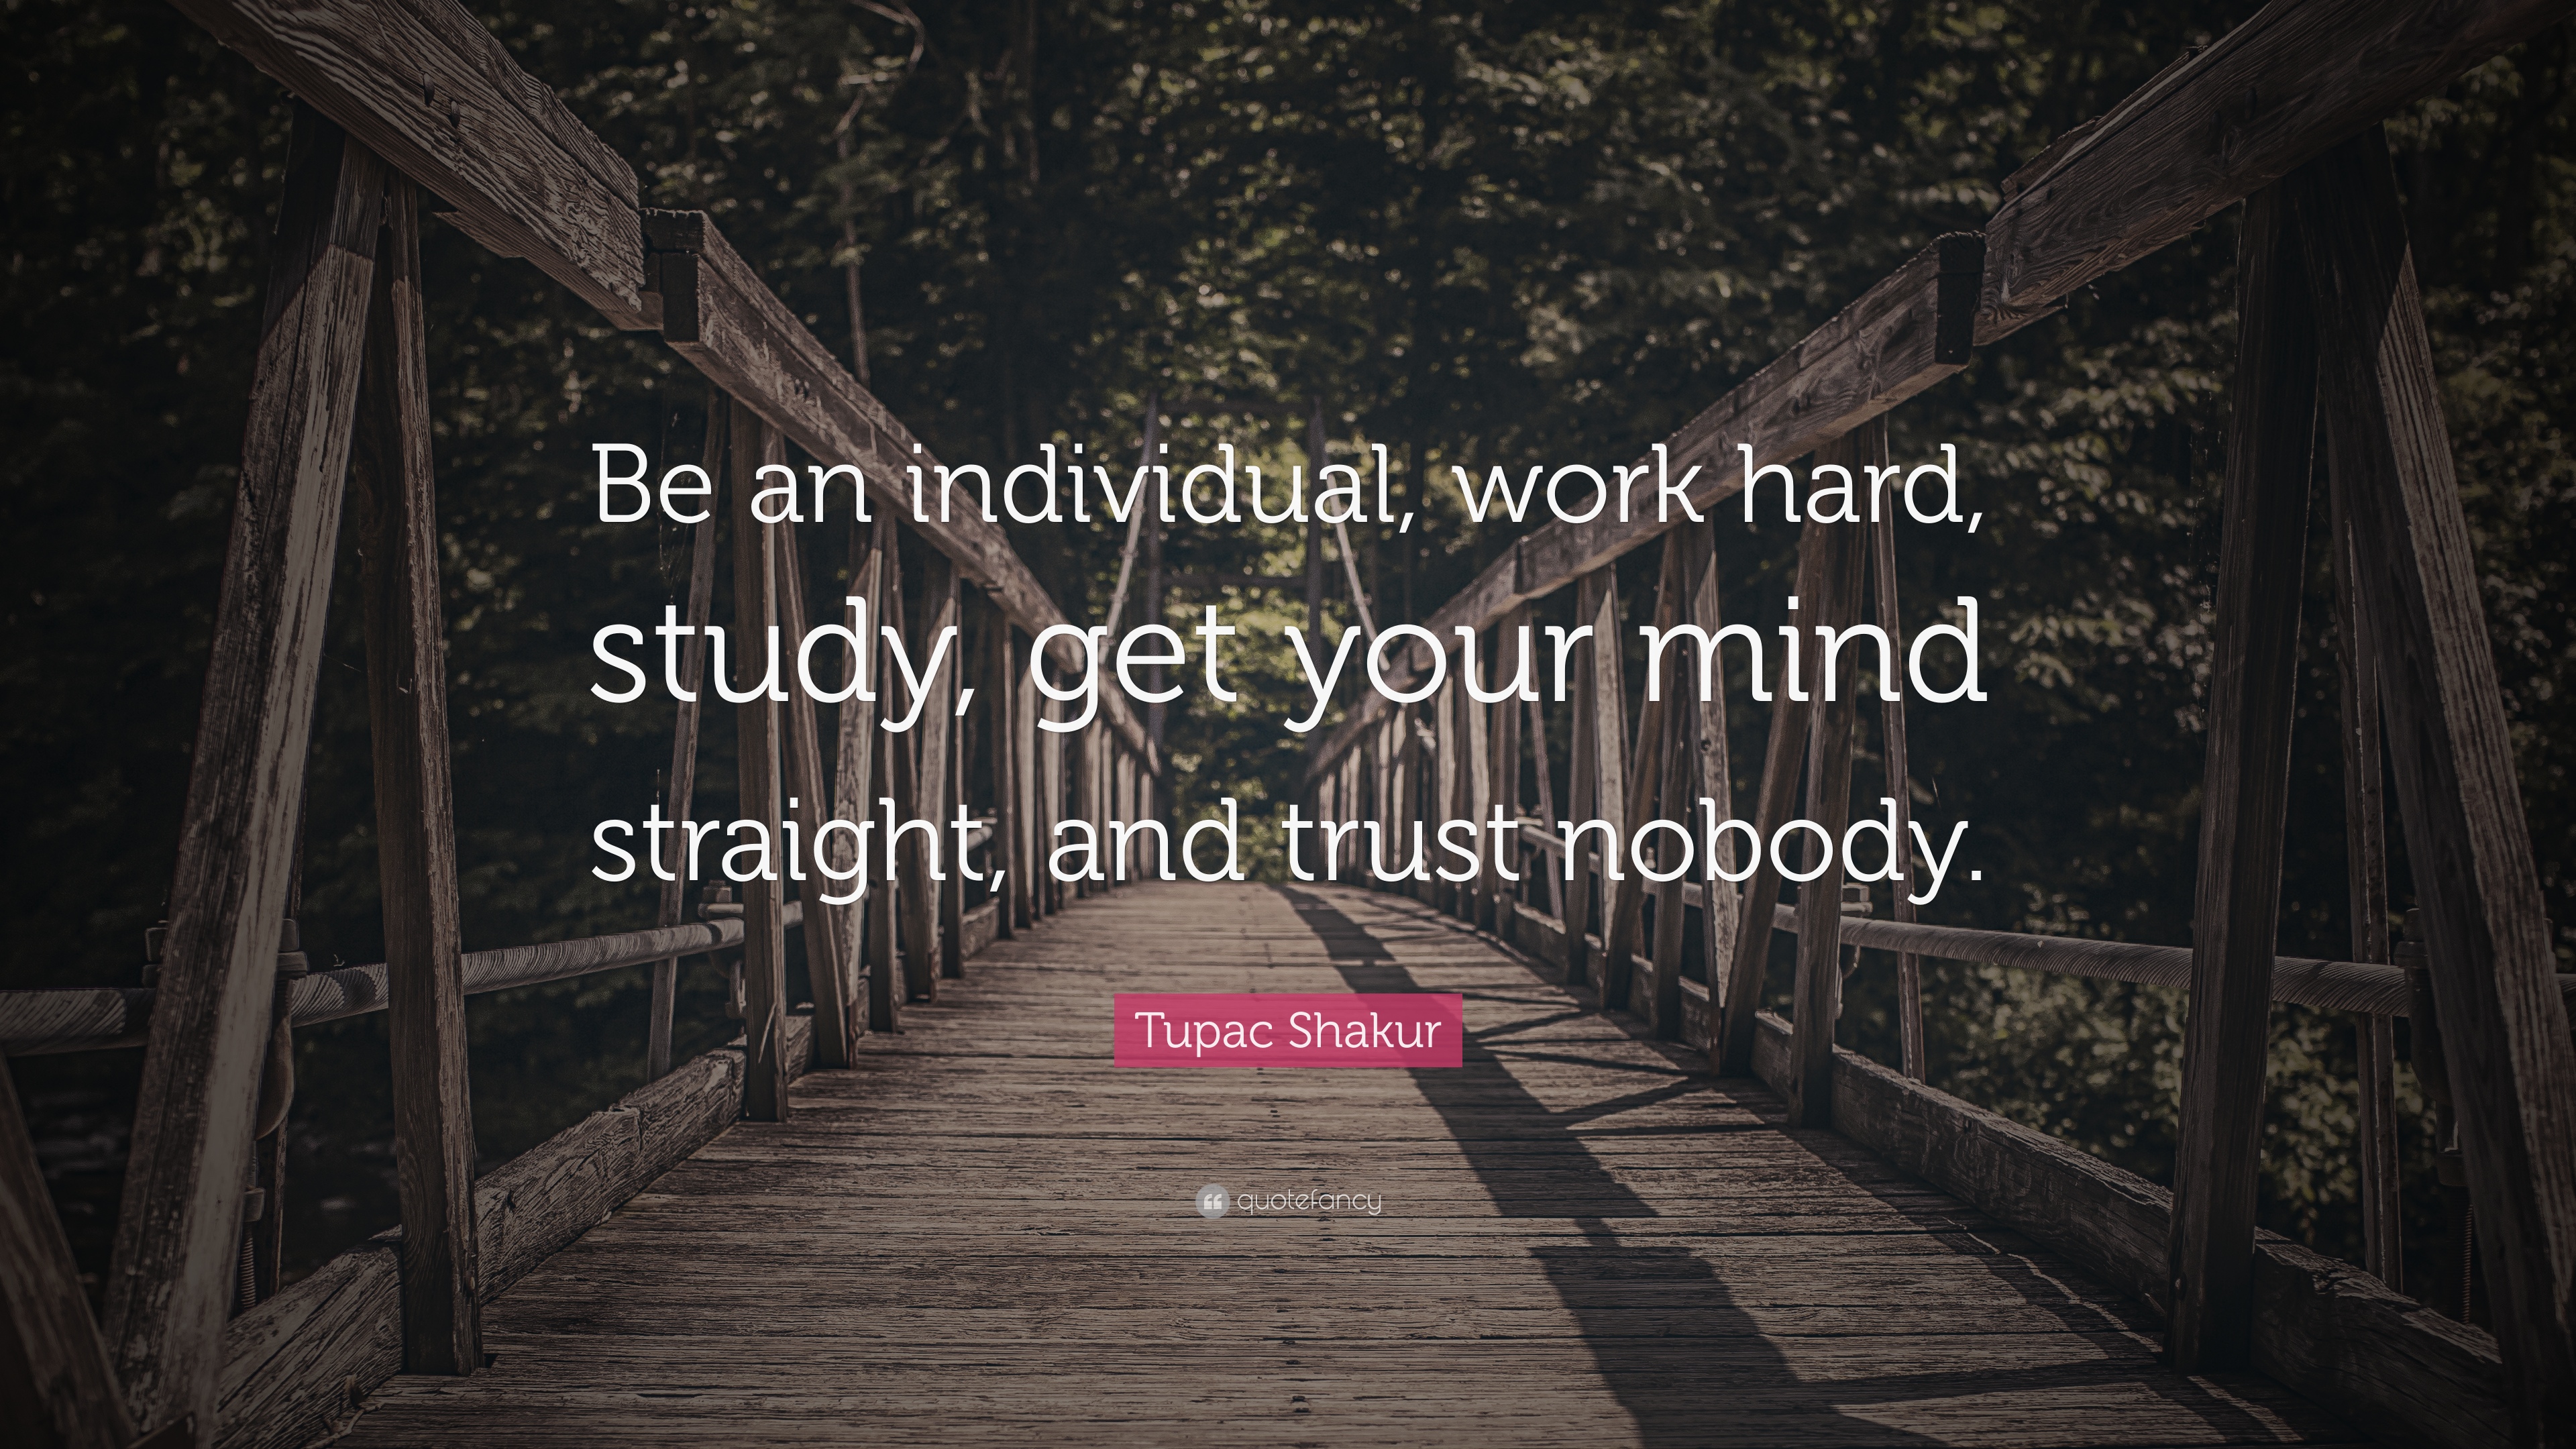 “be An Individual, Work Hard, Study, Get Your Mind - Wanting To Move Away Quotes - HD Wallpaper 